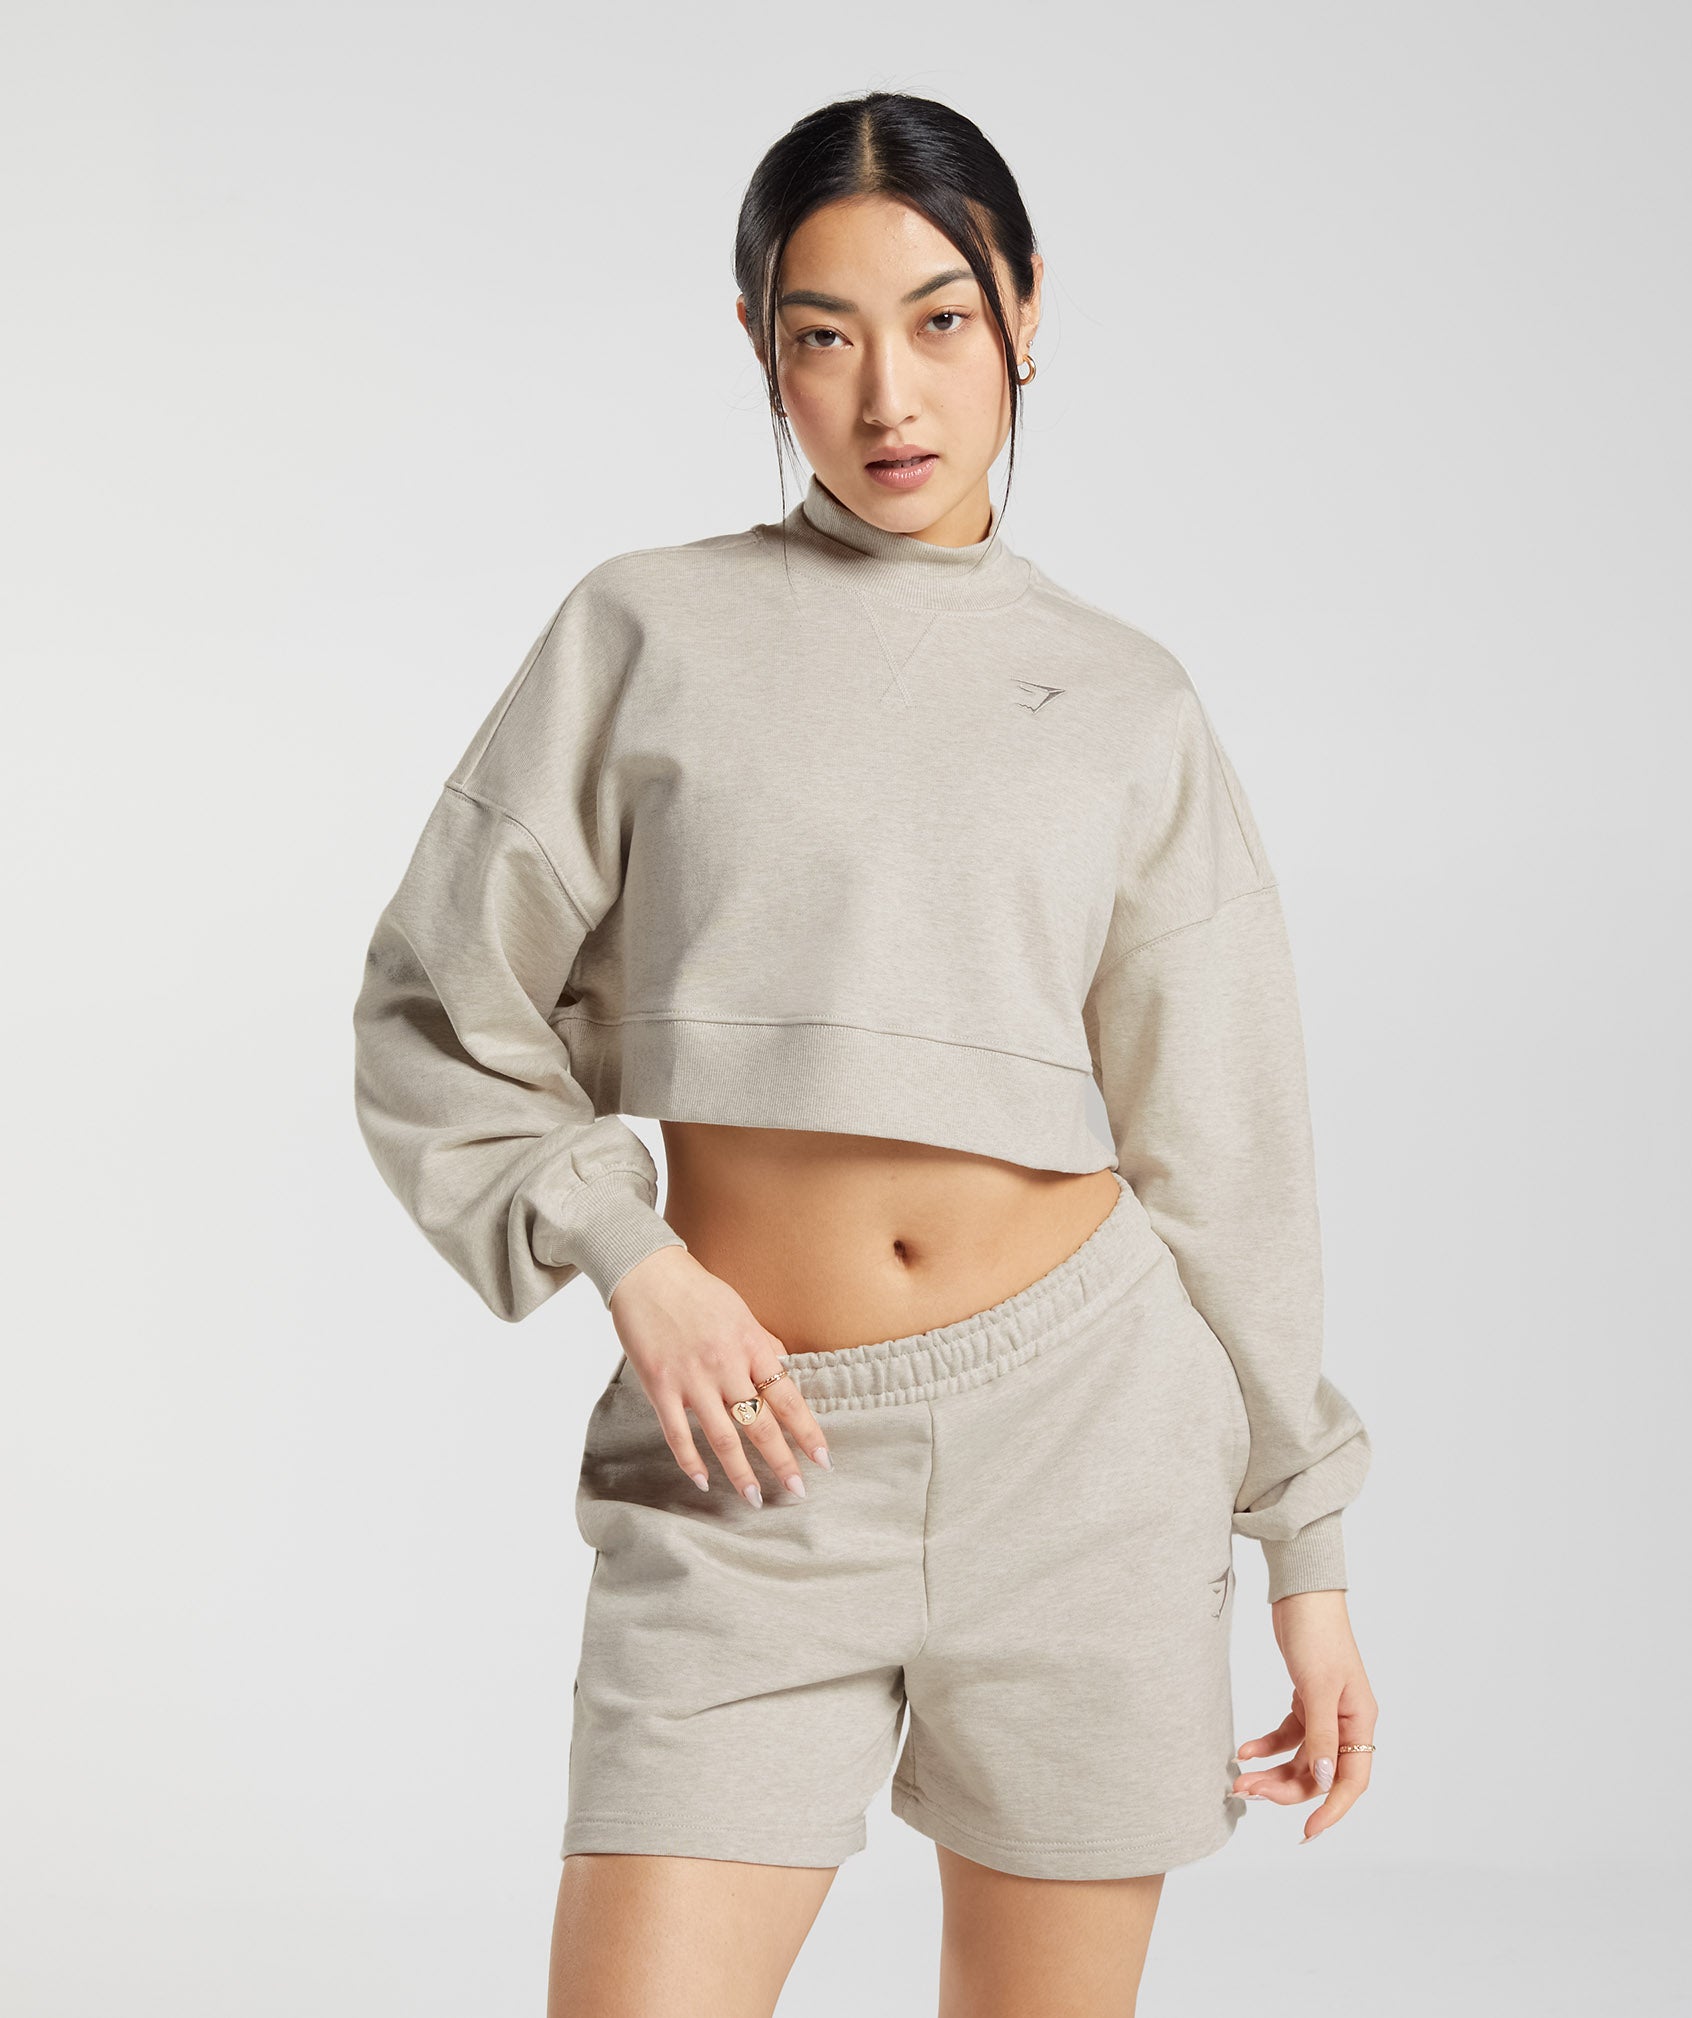 Rest Day Sweats Cropped Pullover in Sand Marl